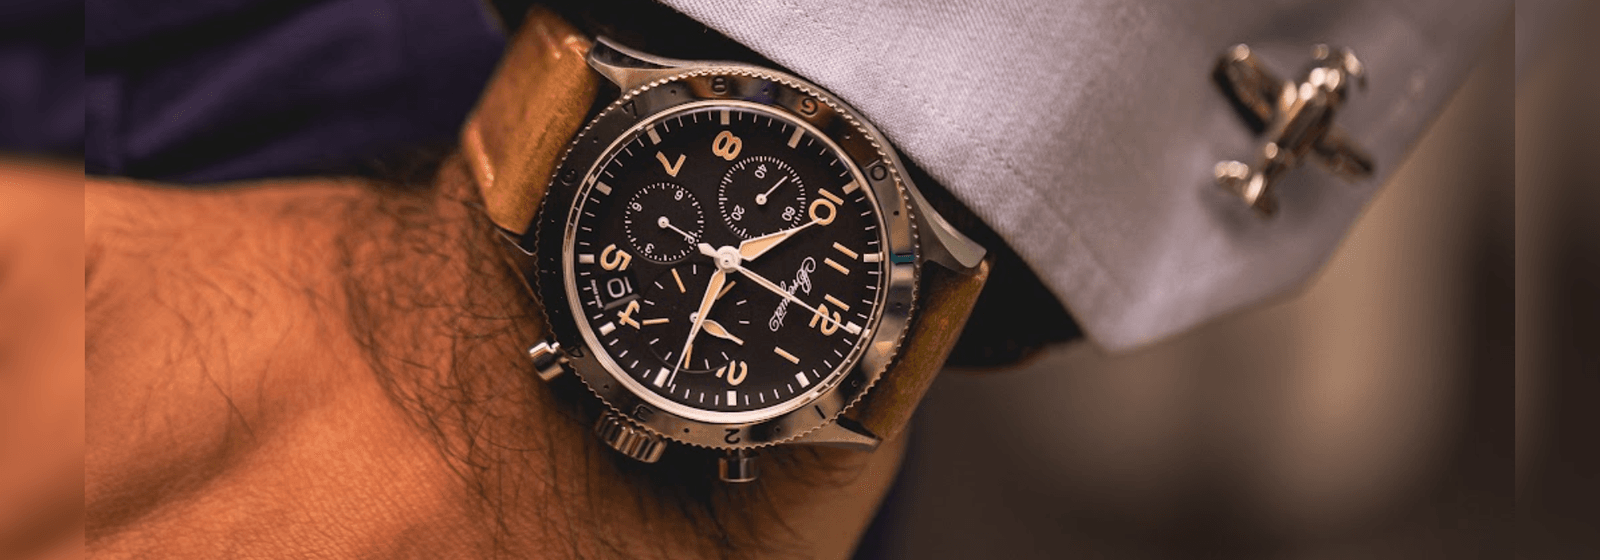 Experience A Flyback Revolution As Breguet’s New Type XX Timepieces Take Flight